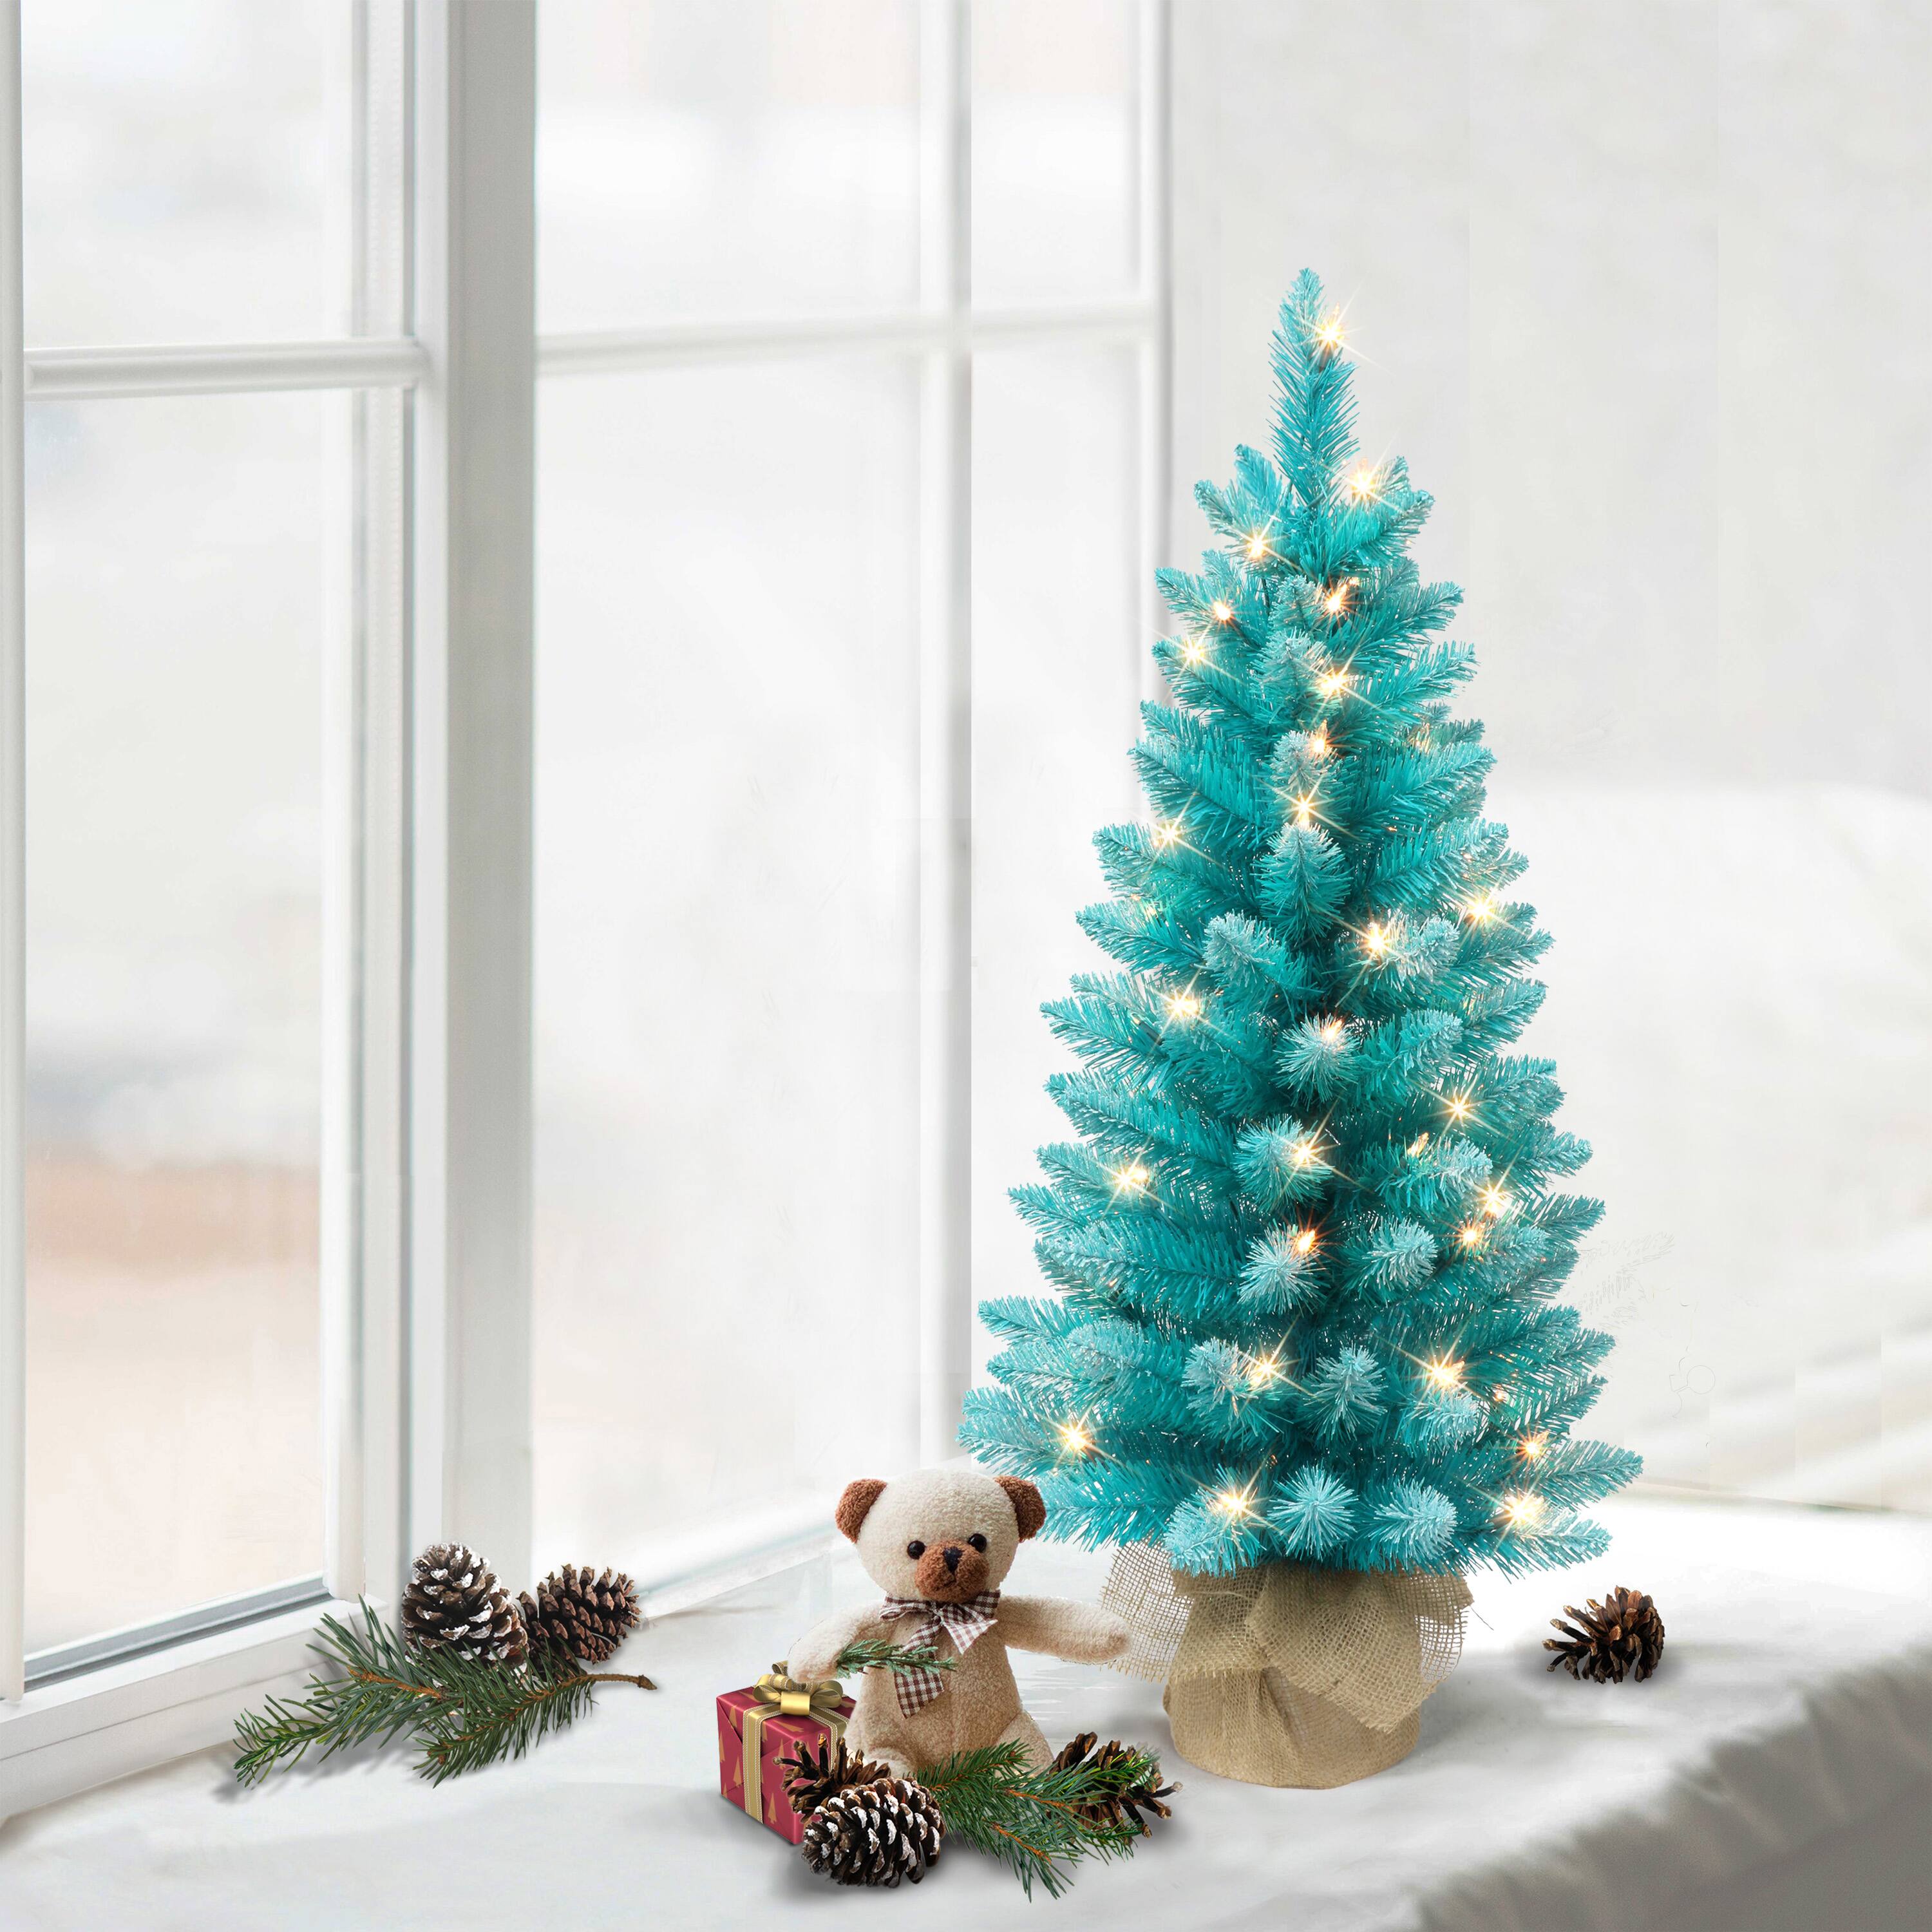 6 Pack: 3ft. Pre-Lit Fashion Teal Artificial Christmas Tree in Burlap Base, Clear Lights